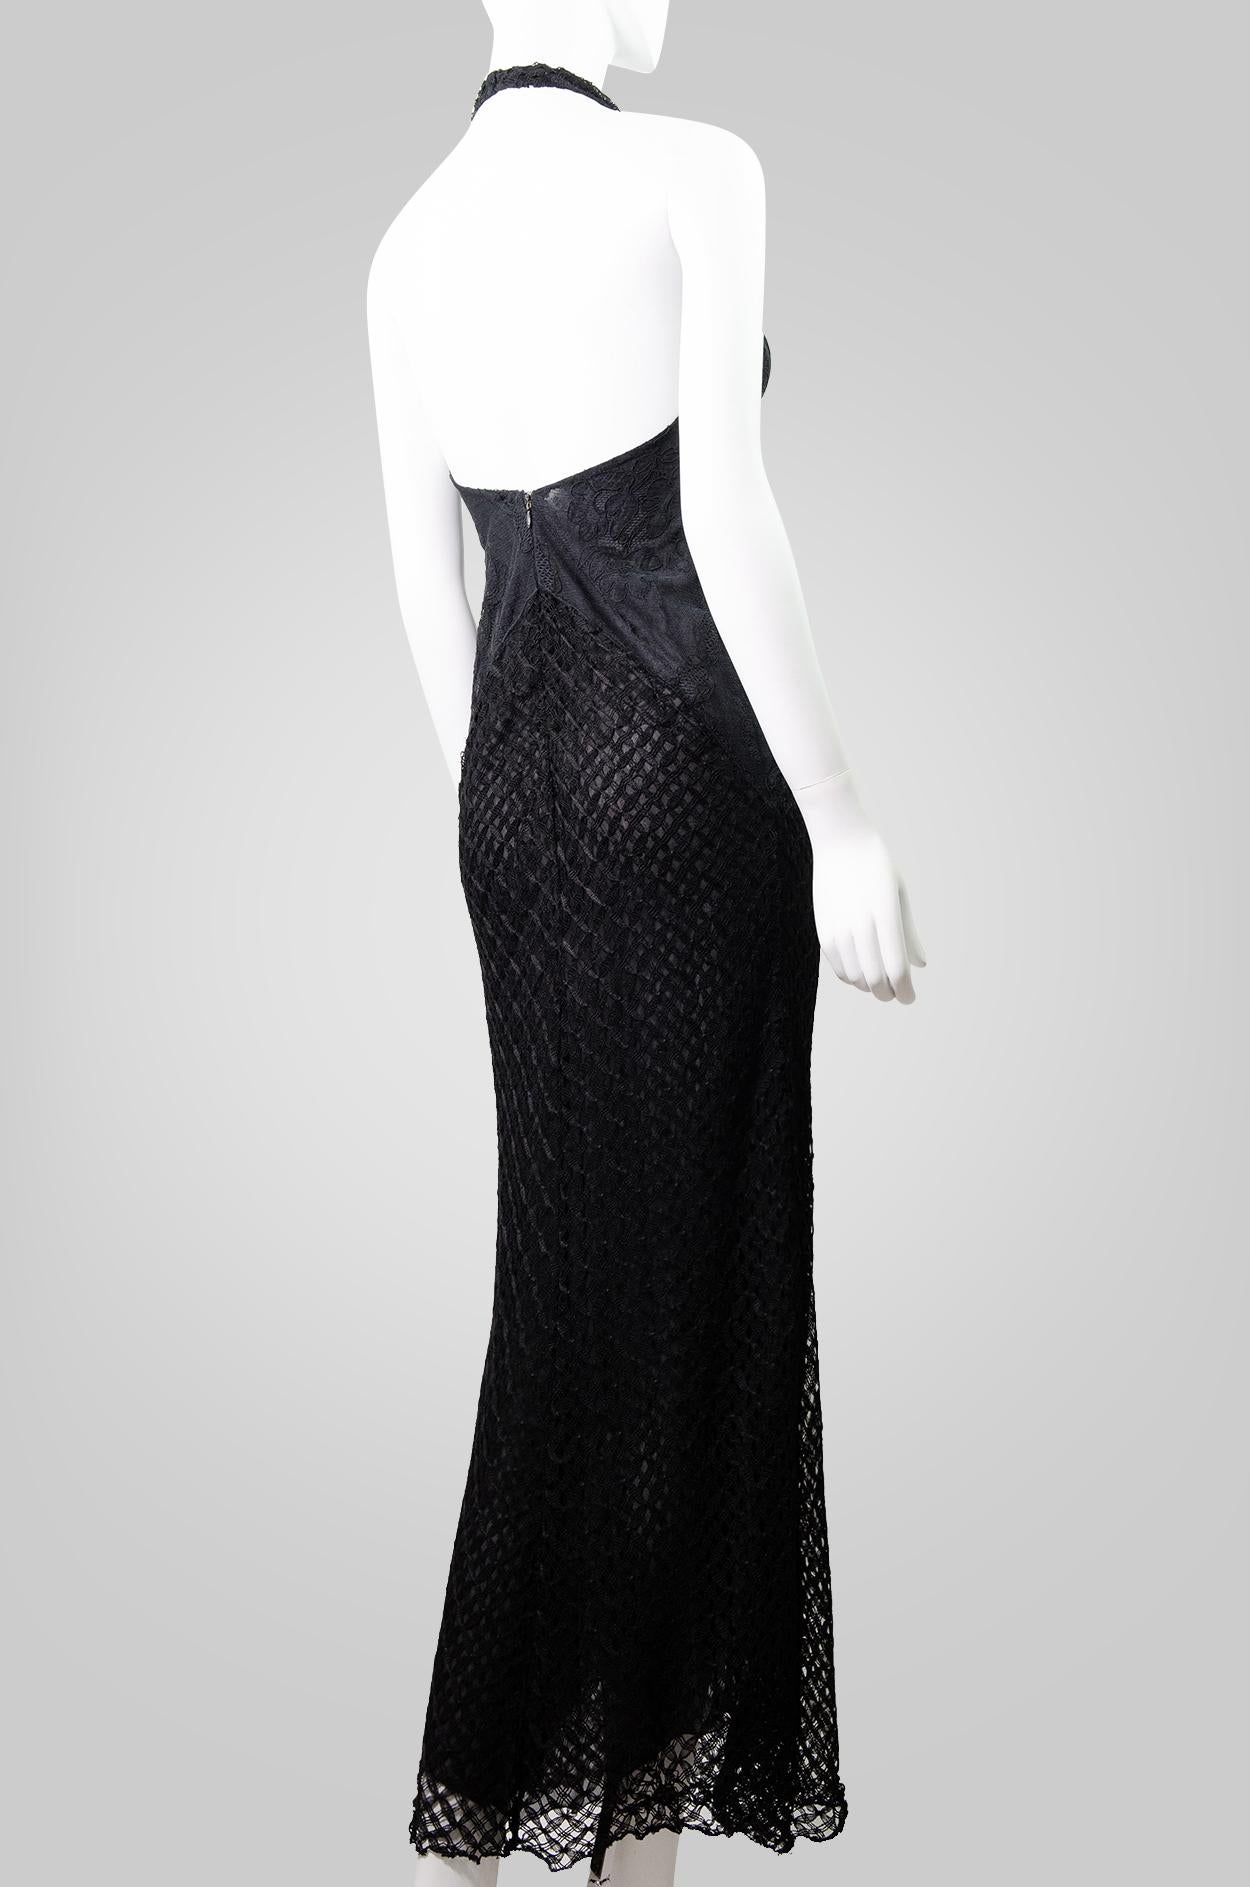 VERSACE S/S 2002 Vintage Sheer Lace Knit Gown  For Sale 3